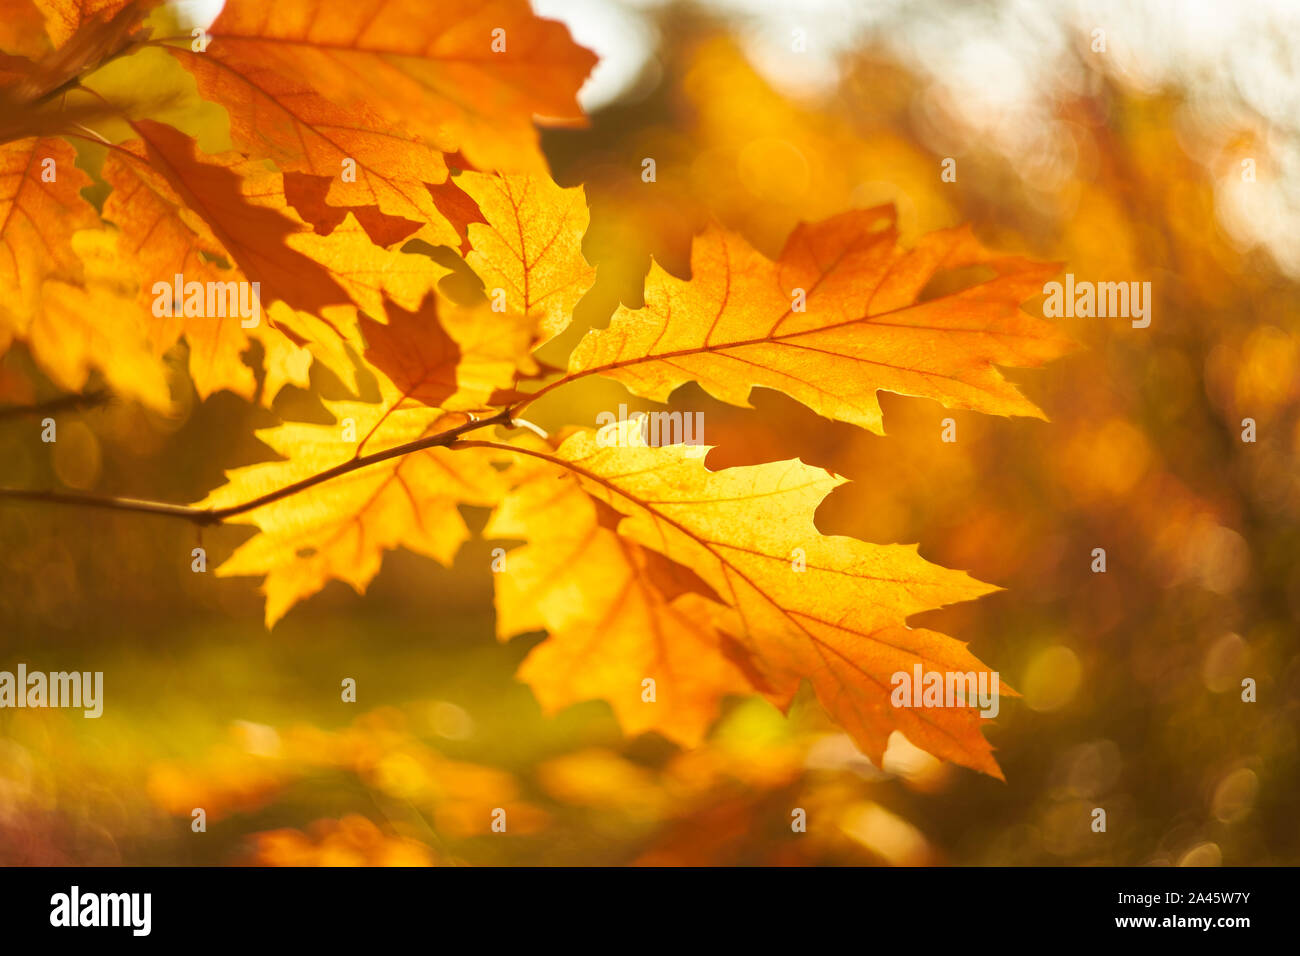 Autumn leaves on the sun. Fall blurred background. Stock Photo